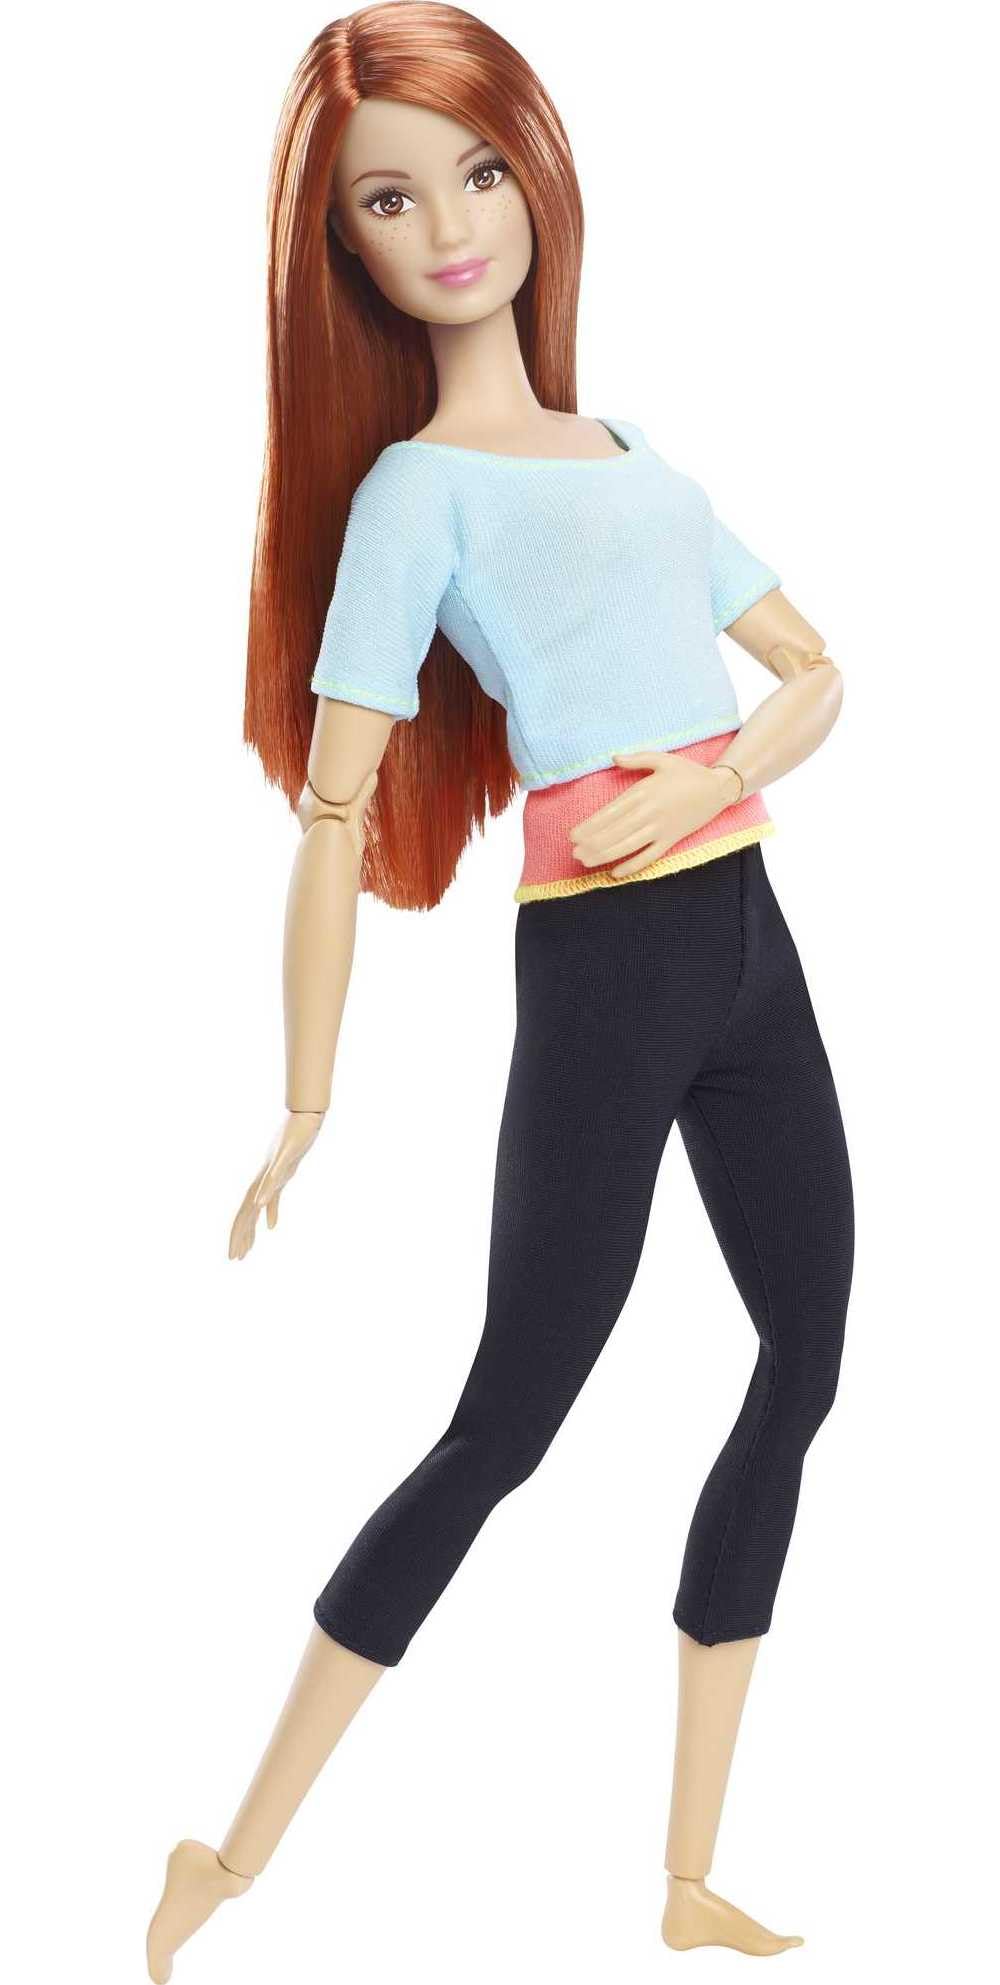 Barbie Made to Move Posable Doll in Pastel Blue Color-Blocked Top and Yoga Leggings, Flexible with Red Hair